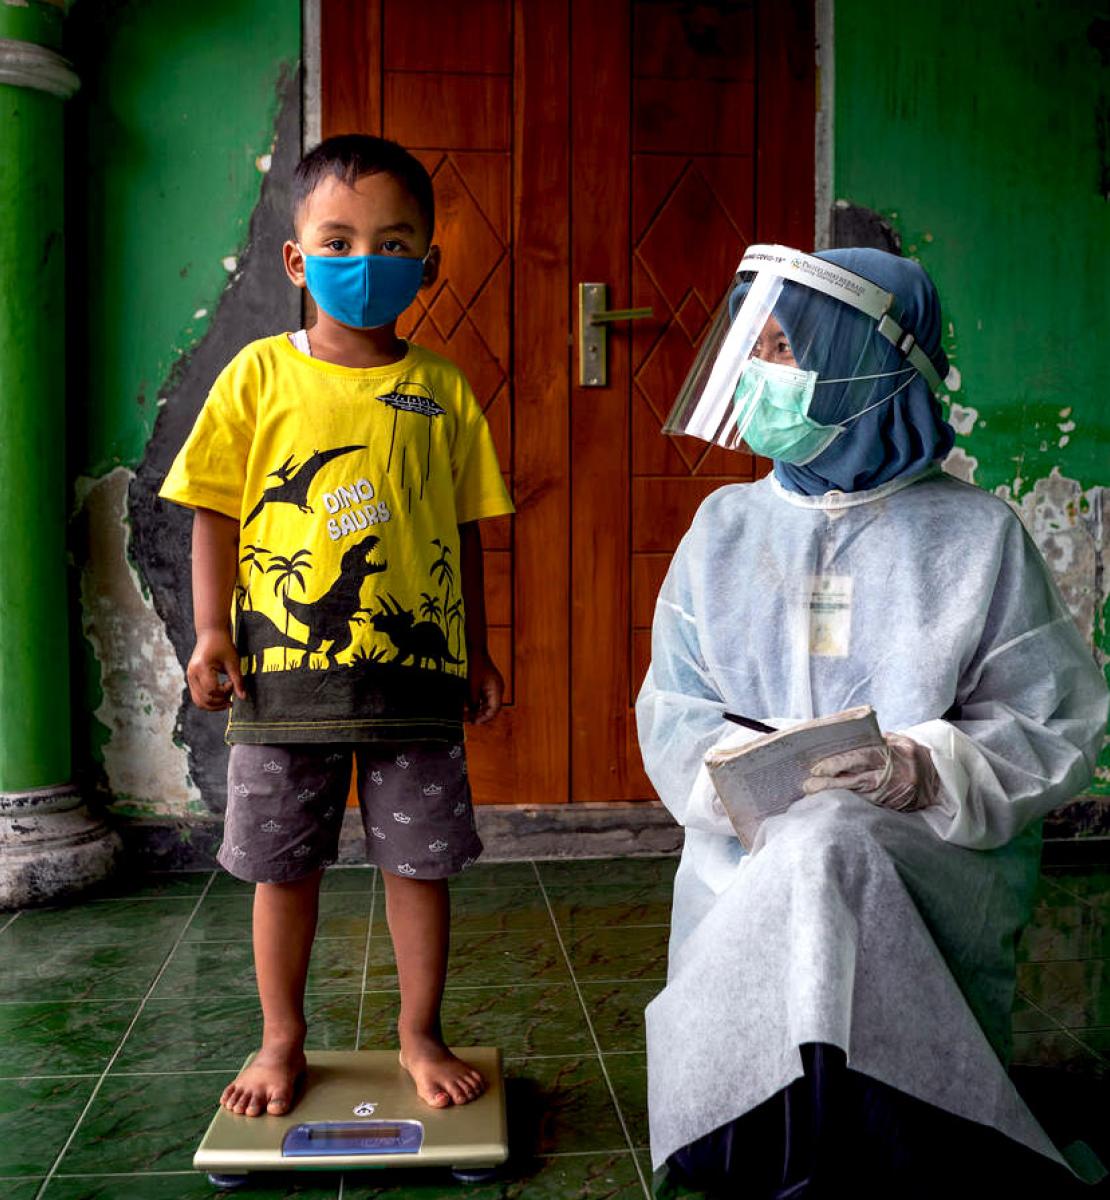 A little boy stands on a scale as he looks at the camera wearing a face mask and a healthcare worker in full head-to-toe PPE kneels by him.